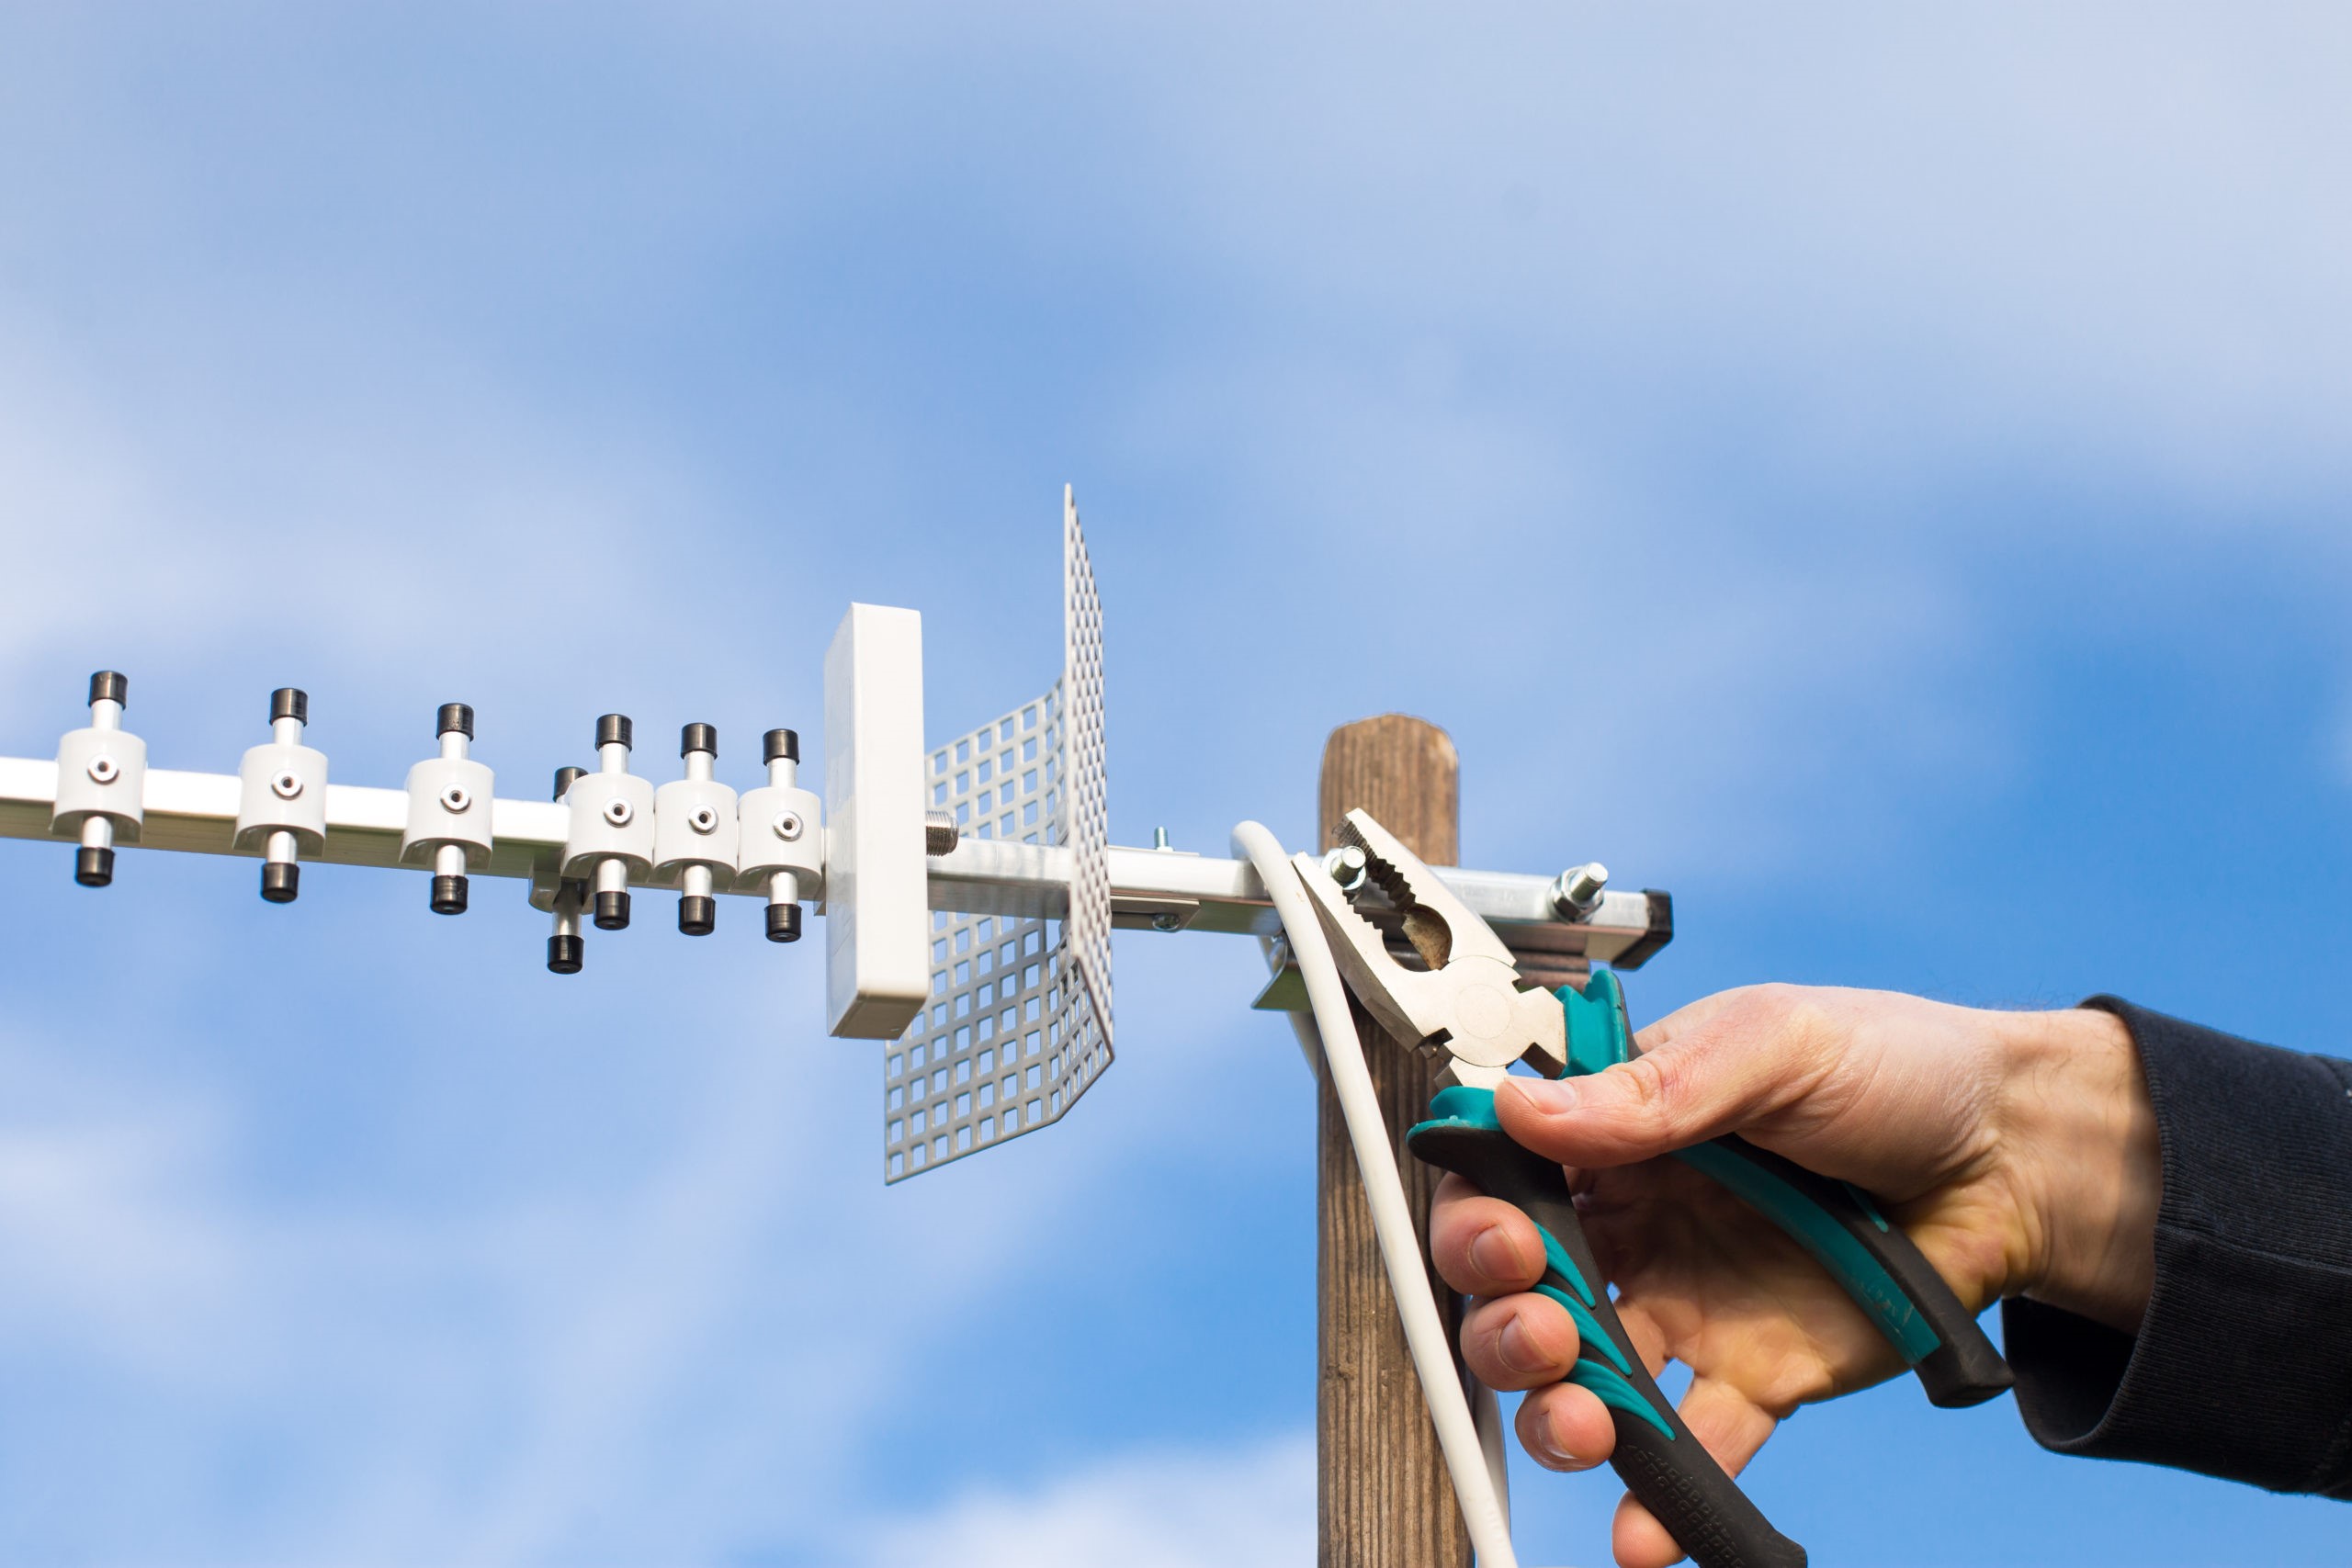 How To Choose An Outdoor Antenna